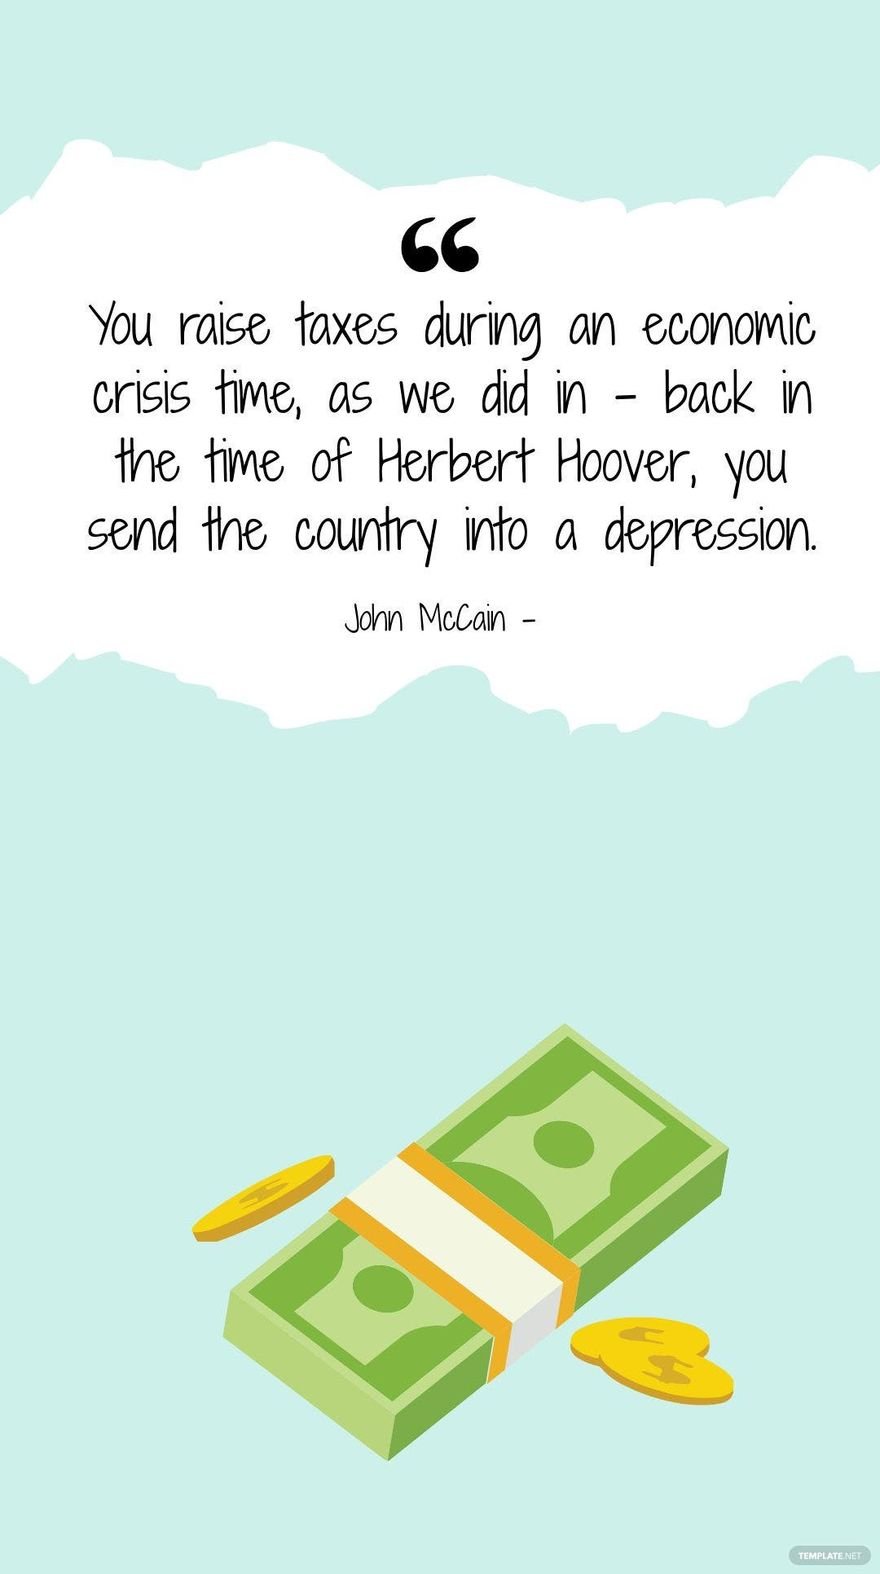 John McCain - You raise taxes during an economic crisis time, as we did in - back in the time of Herbert Hoover, you send the country into a depression.